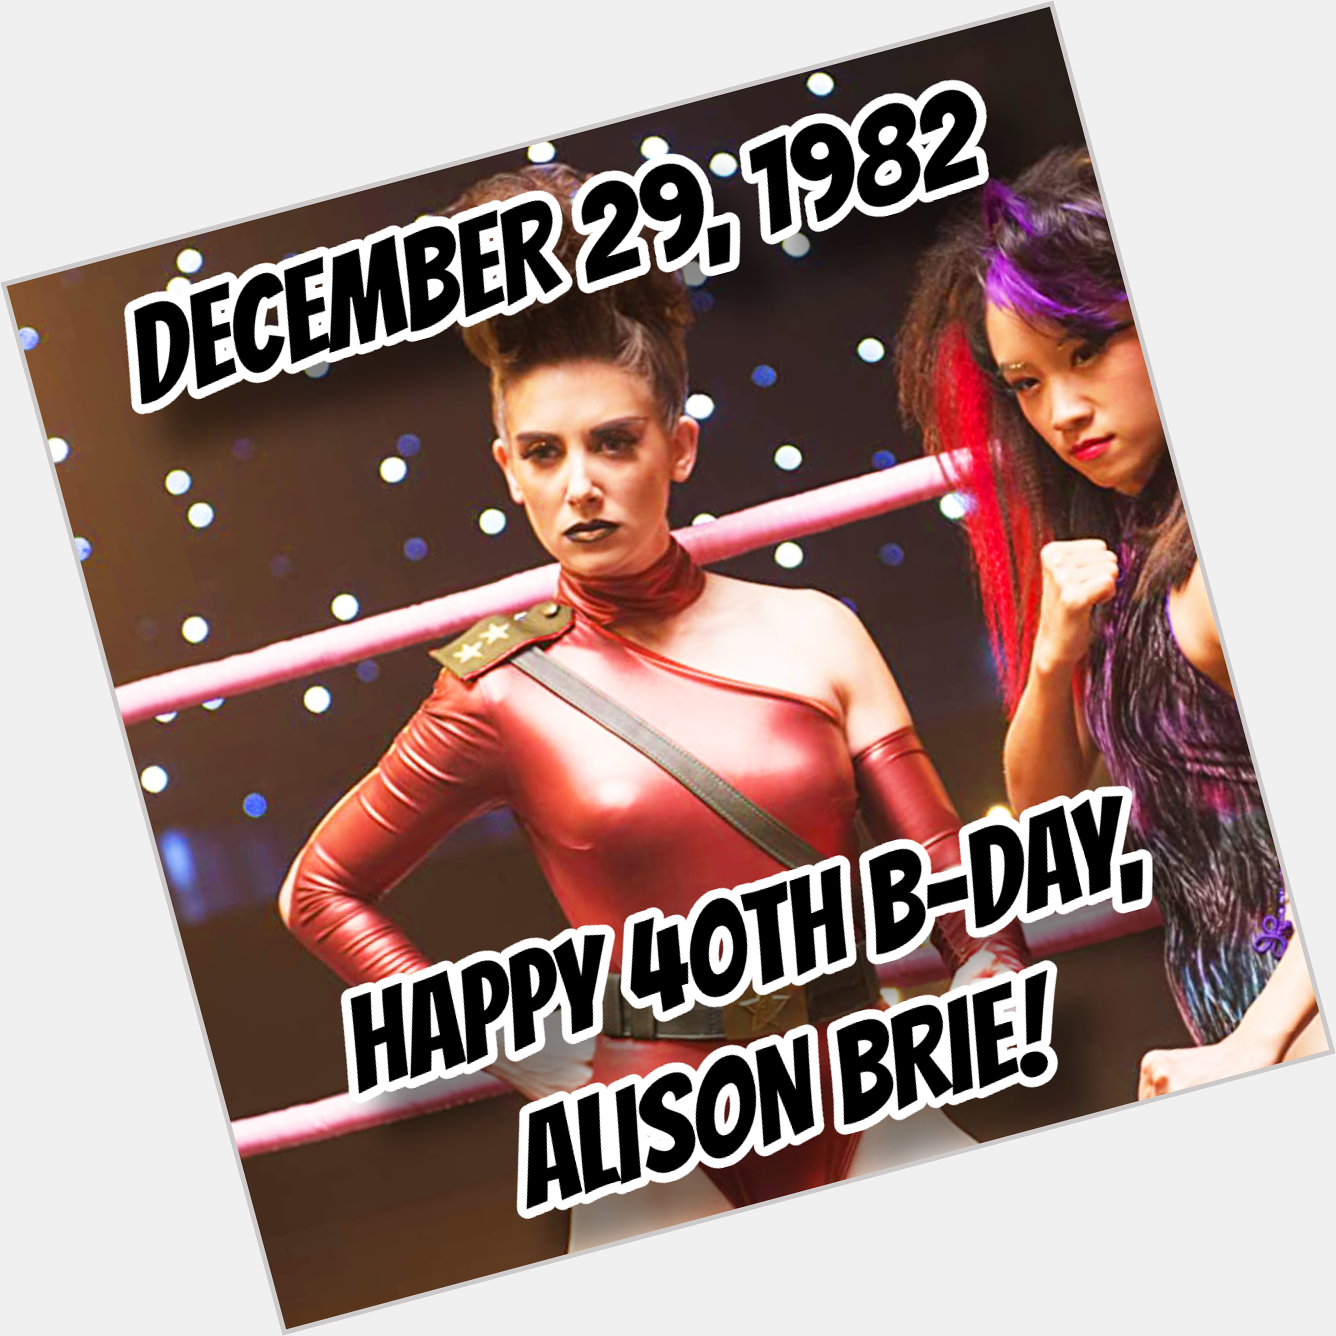 Happy 40th Alison Brie!!!

What\s YOUR  movie or streaming show??!! 